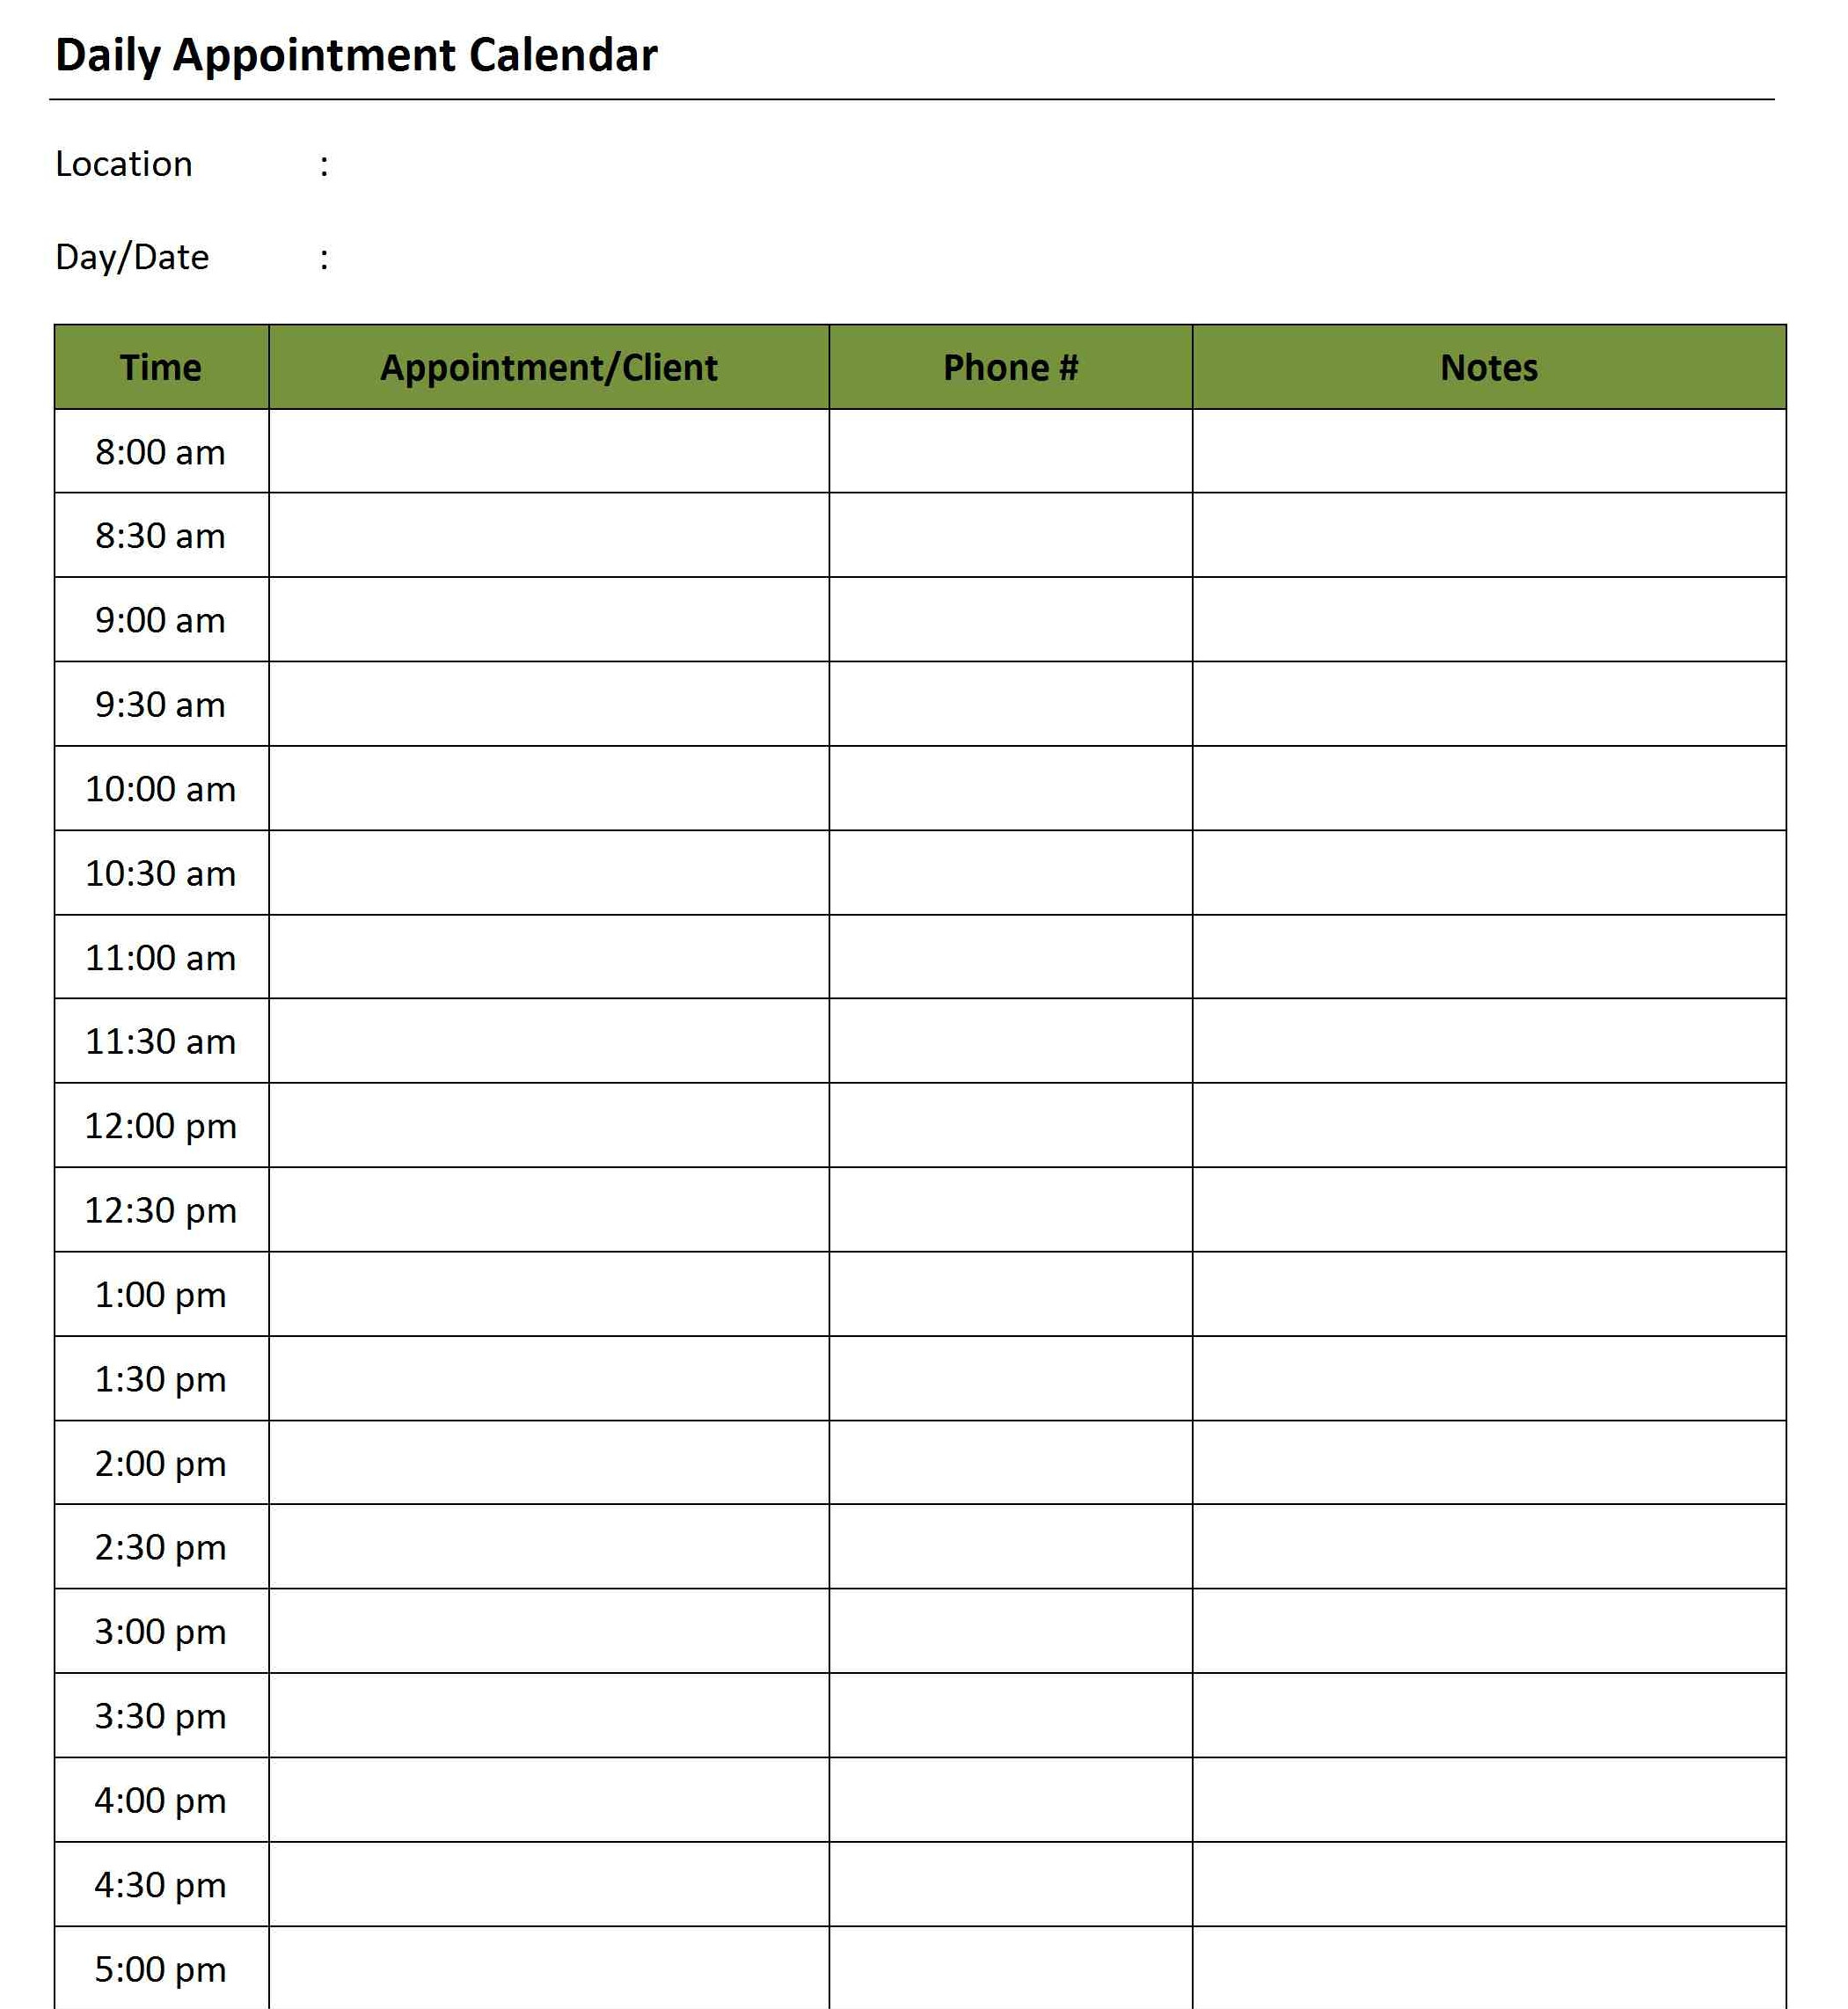 Weekly Appointment Calendar Template Daily Appointment Calendar